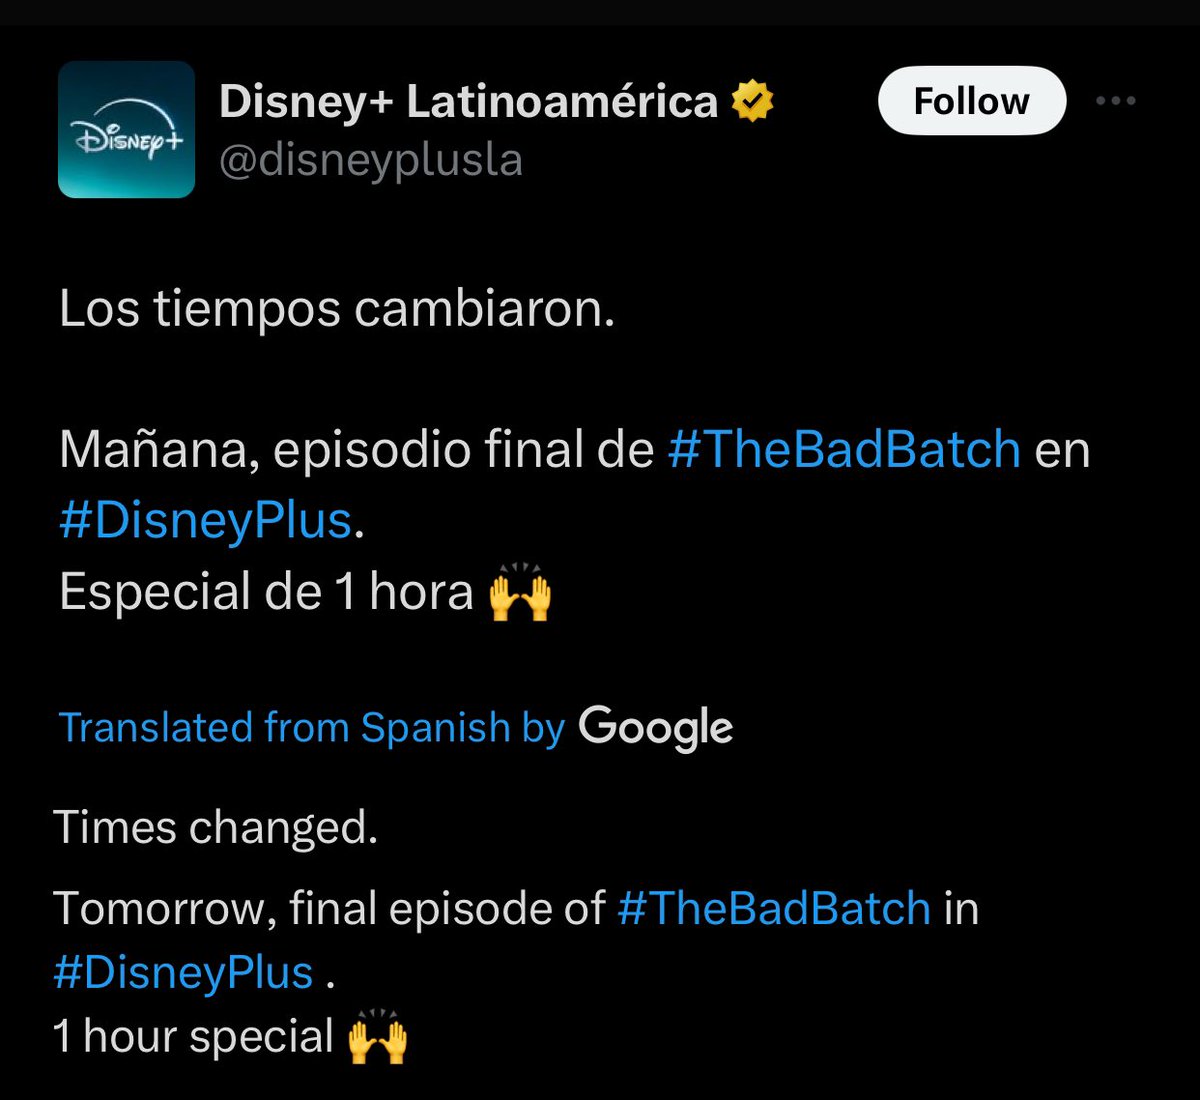 Disney+ Latinoamérica has revealed that the series finale of ‘STAR WARS: THE BAD BATCH’ will be over 1 hour long. Releasing tomorrow.